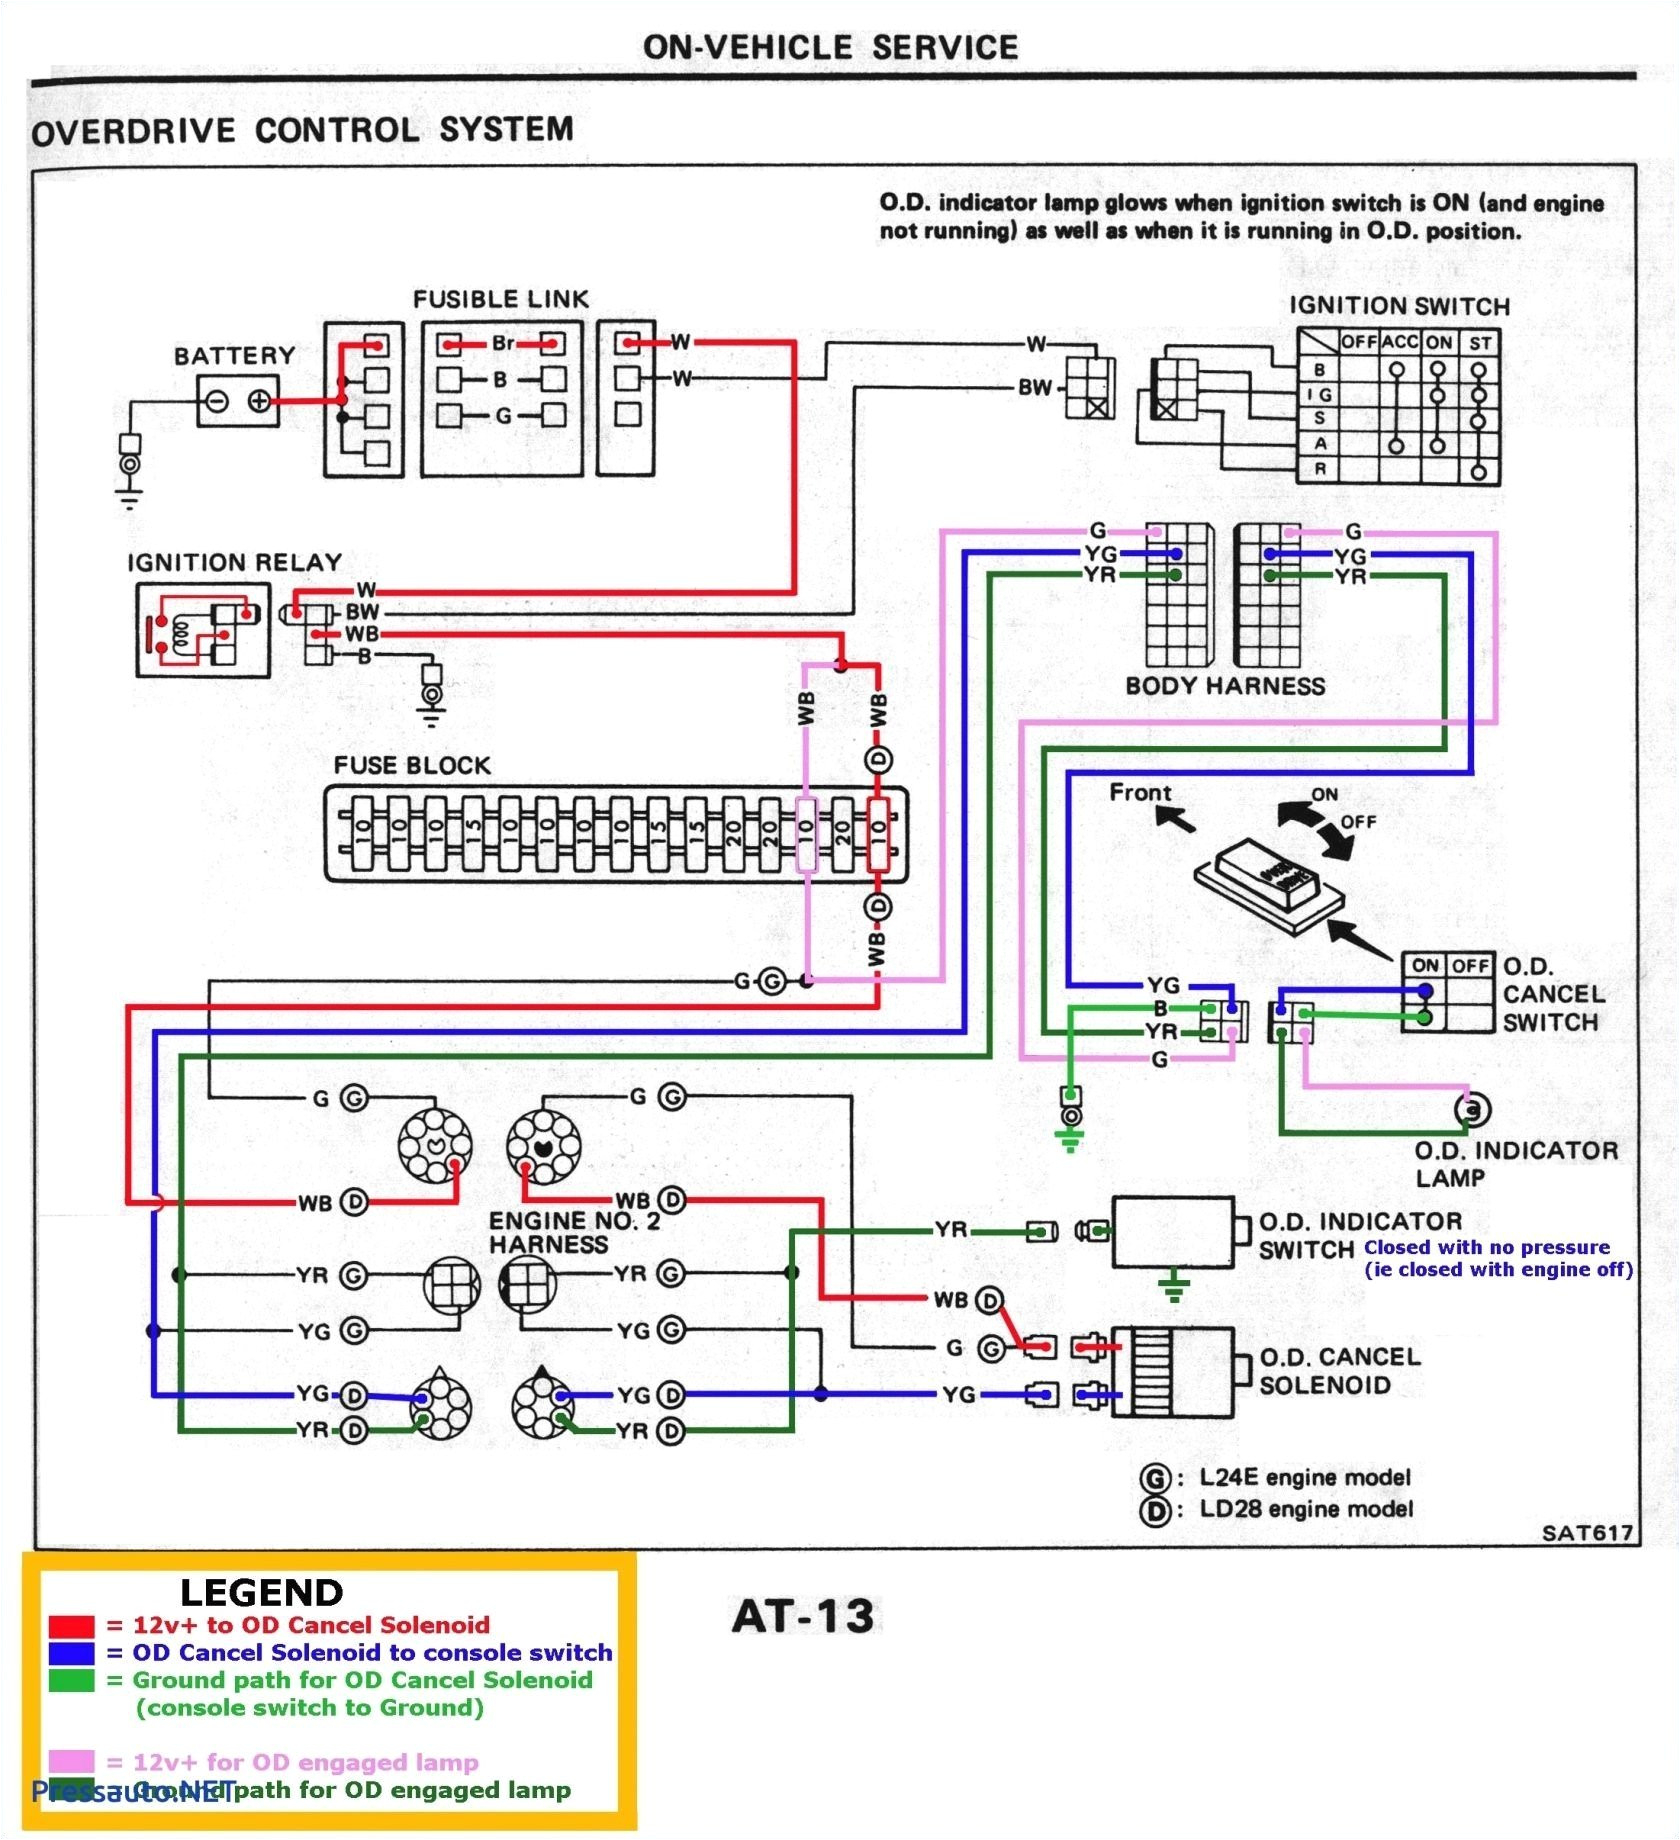 tortoise point motor wiring diagram inspirational mcdonnell miller low water cutoff wiring diagram electrical circuit